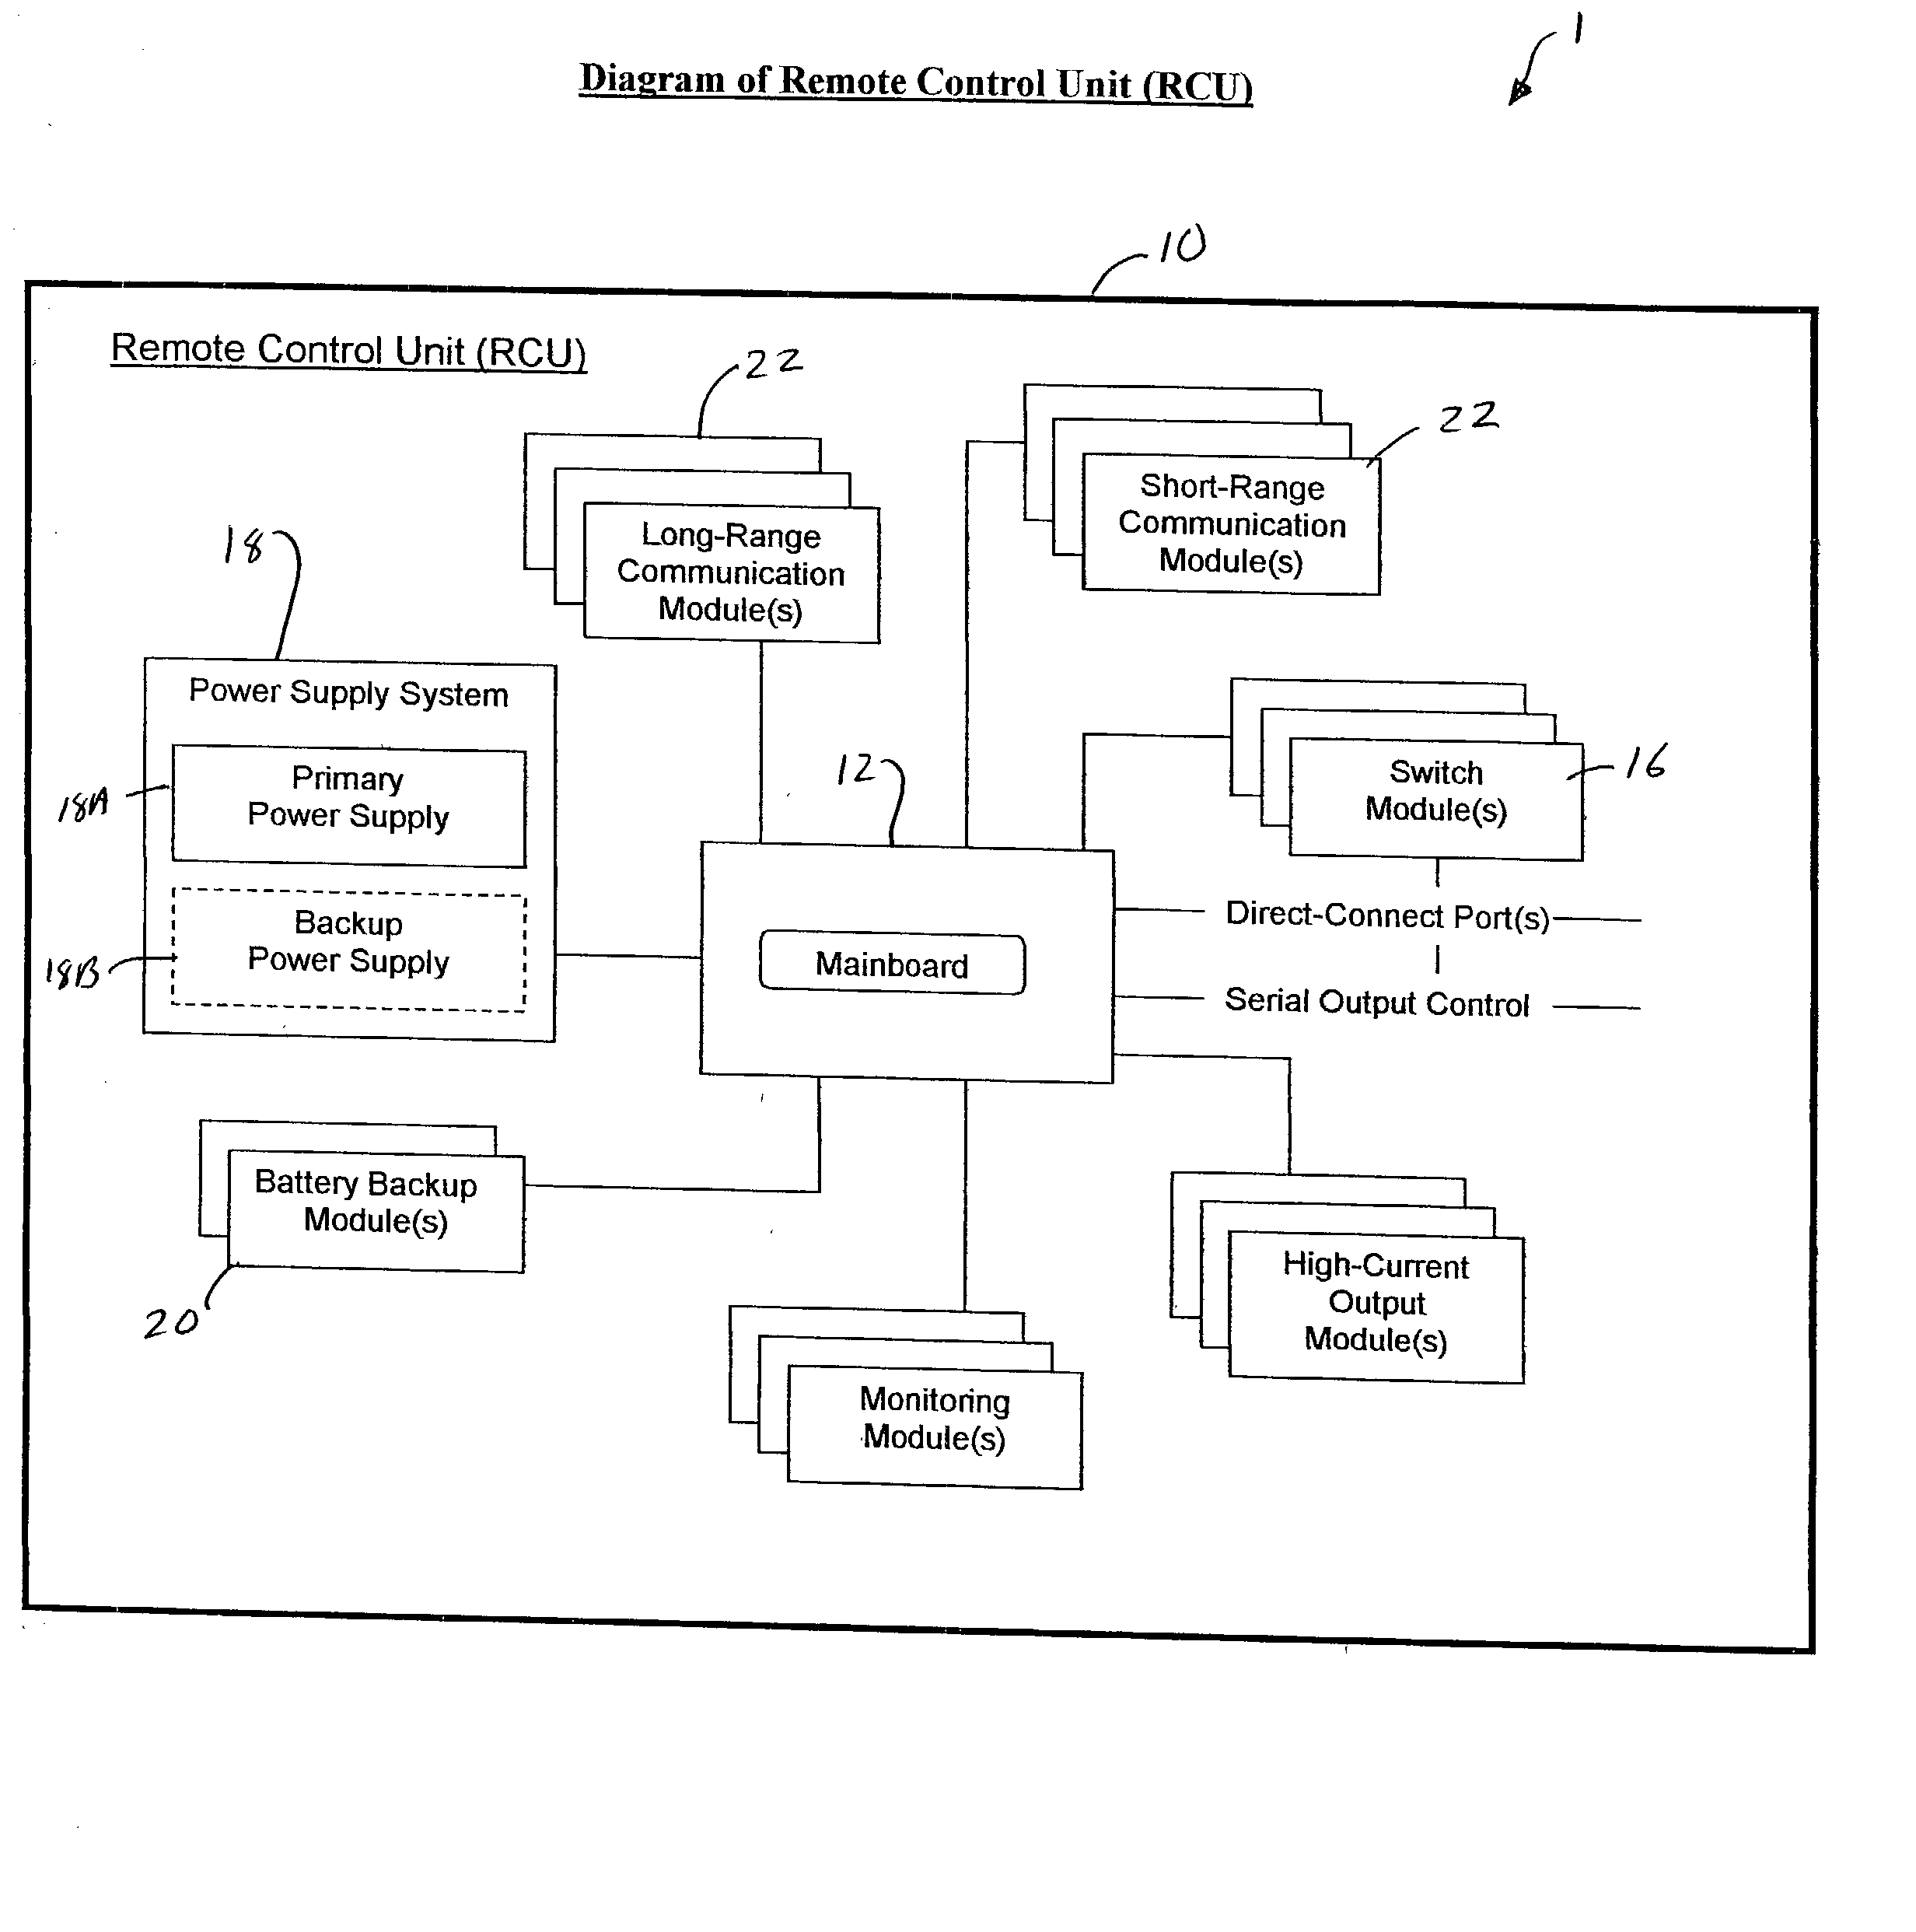 System to remotely control and monitor devices and data